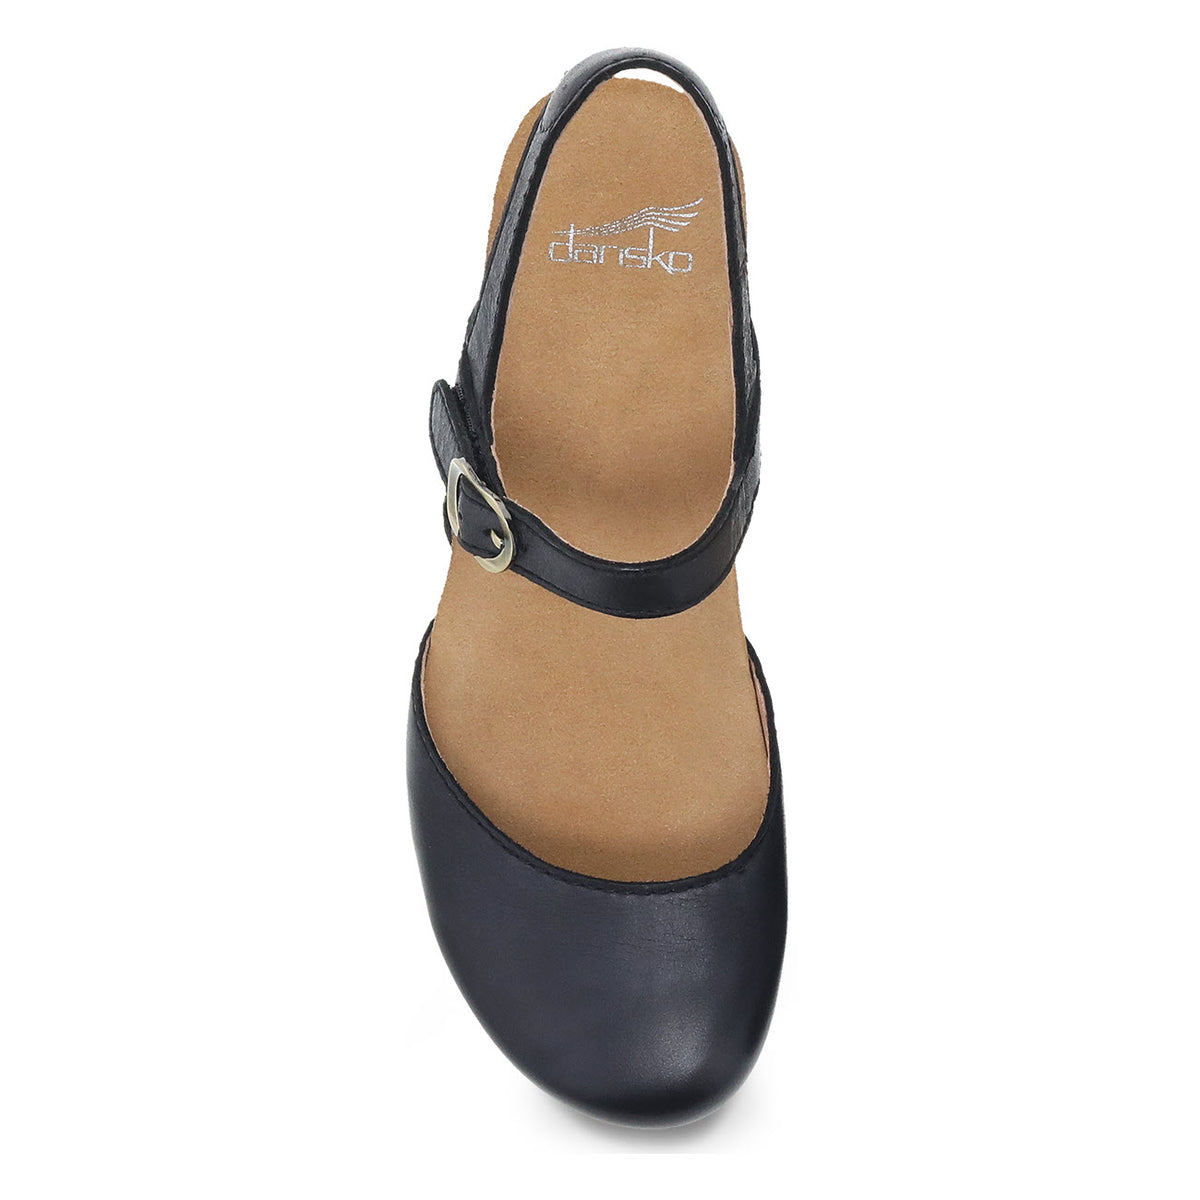 Dansko black leather Tiffani mary jane style shoe with an ankle strap and a round toe.